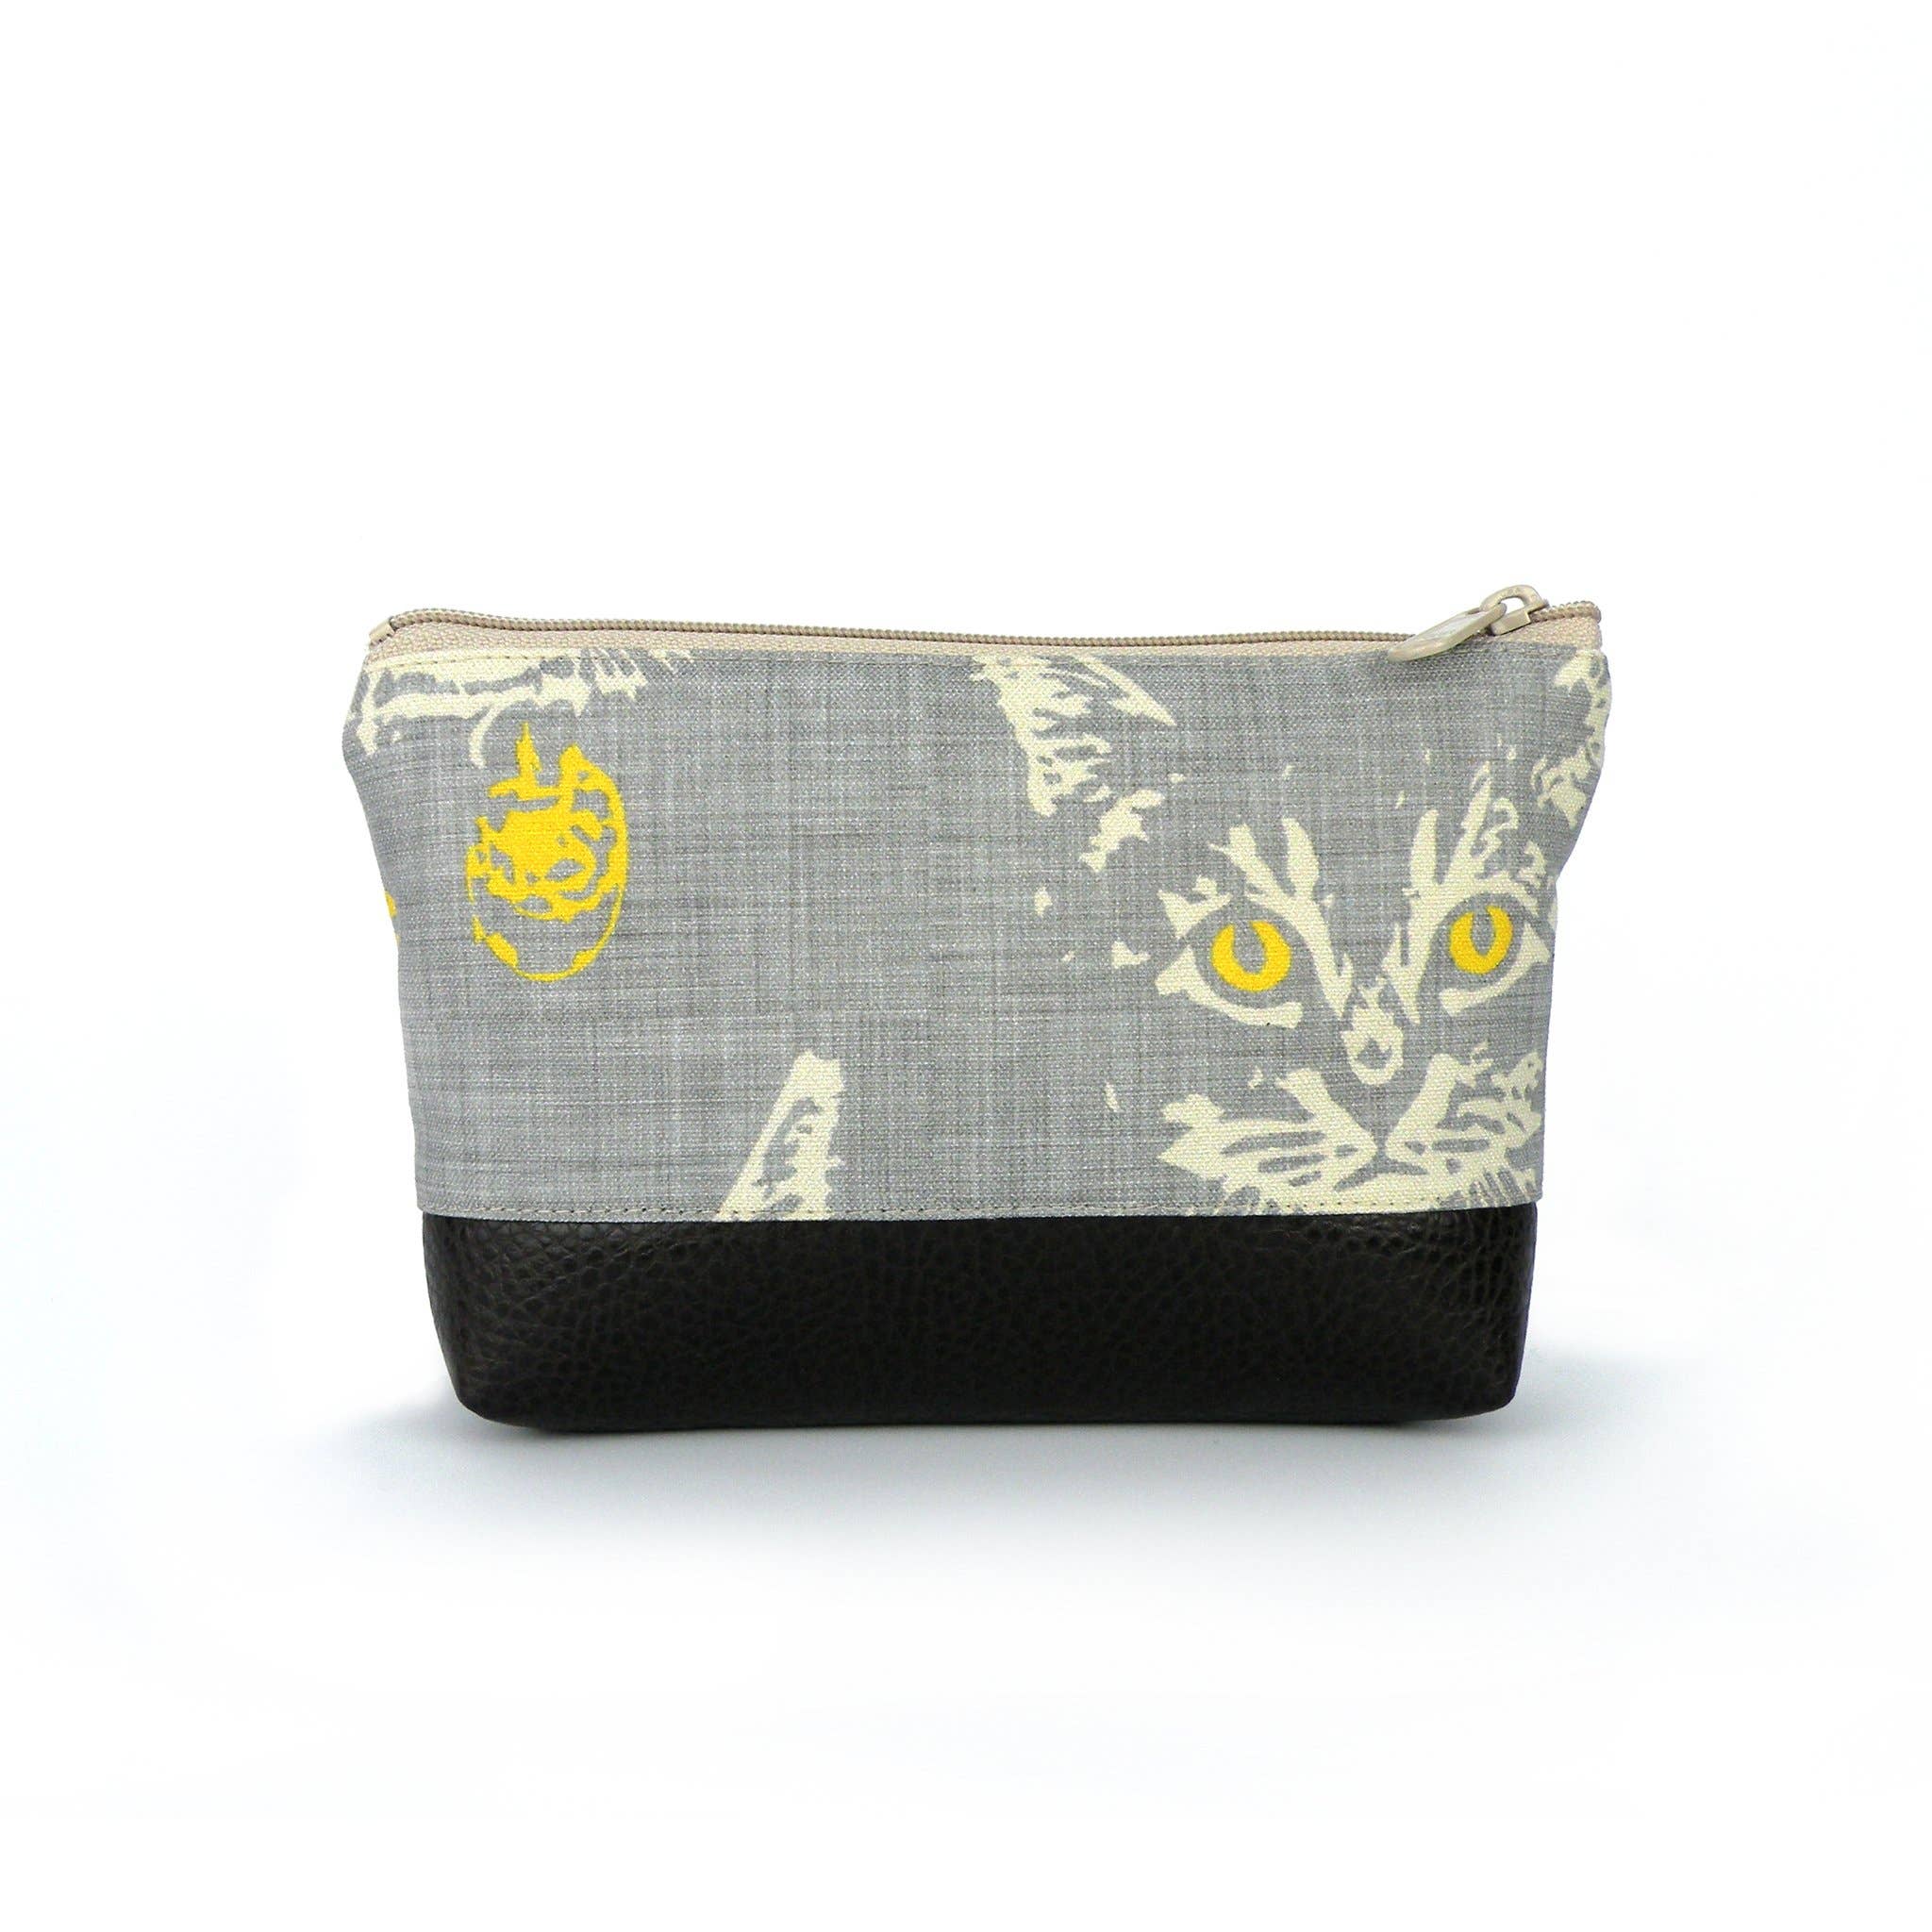 Small Cosmetic Clutch in Cat Print Linen